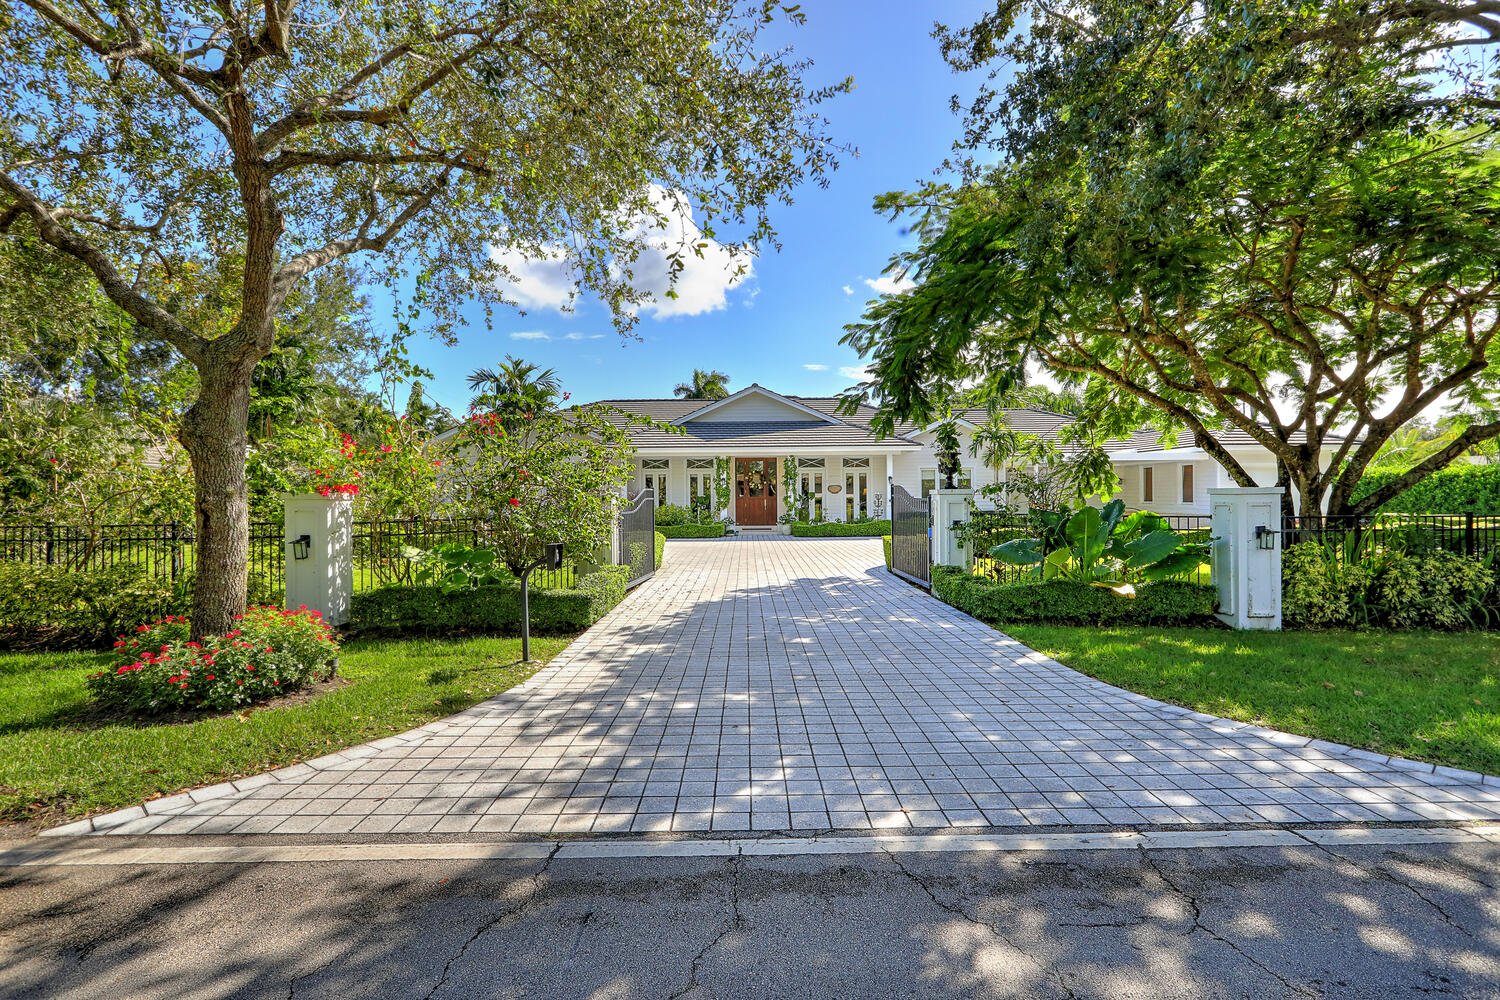 Master Brokers Forum Listing: Check Out This 'Hamptons Meets Key West' Style North Pinecrest Home Asking $5.8 Million 4.jpg